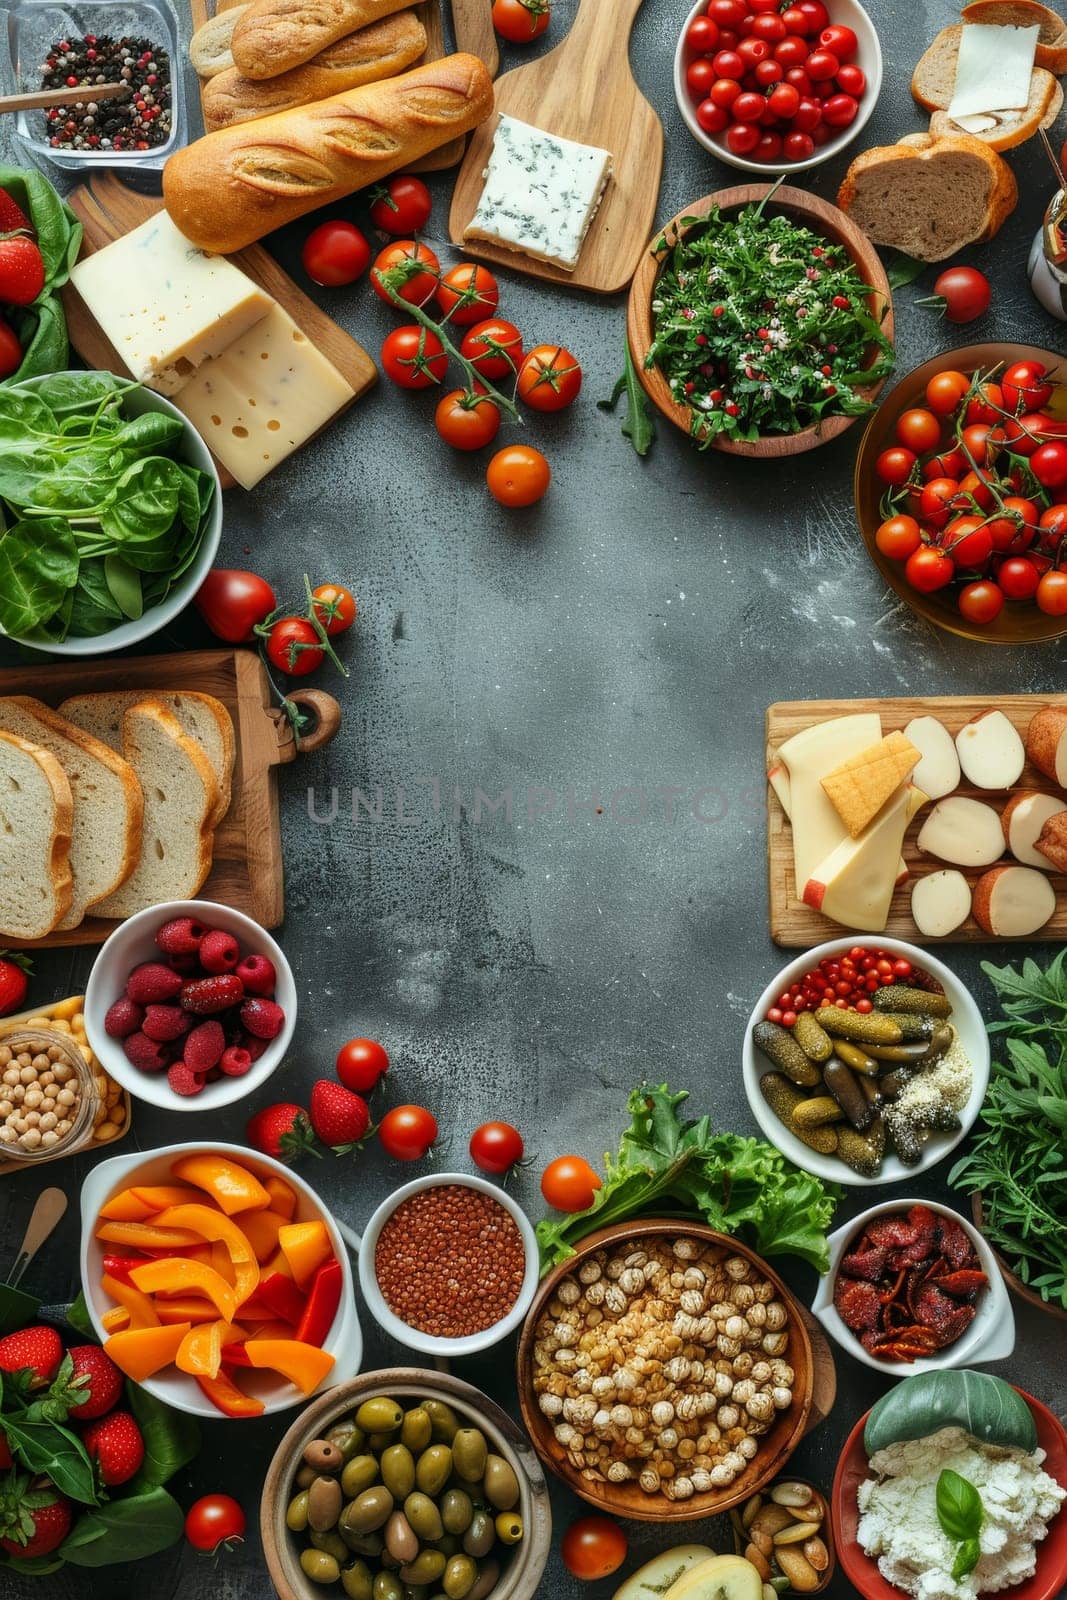 A table full of healthy food options including fruits, vegetables, and bread. The table is set up in a way that makes it easy to see and access all the food items